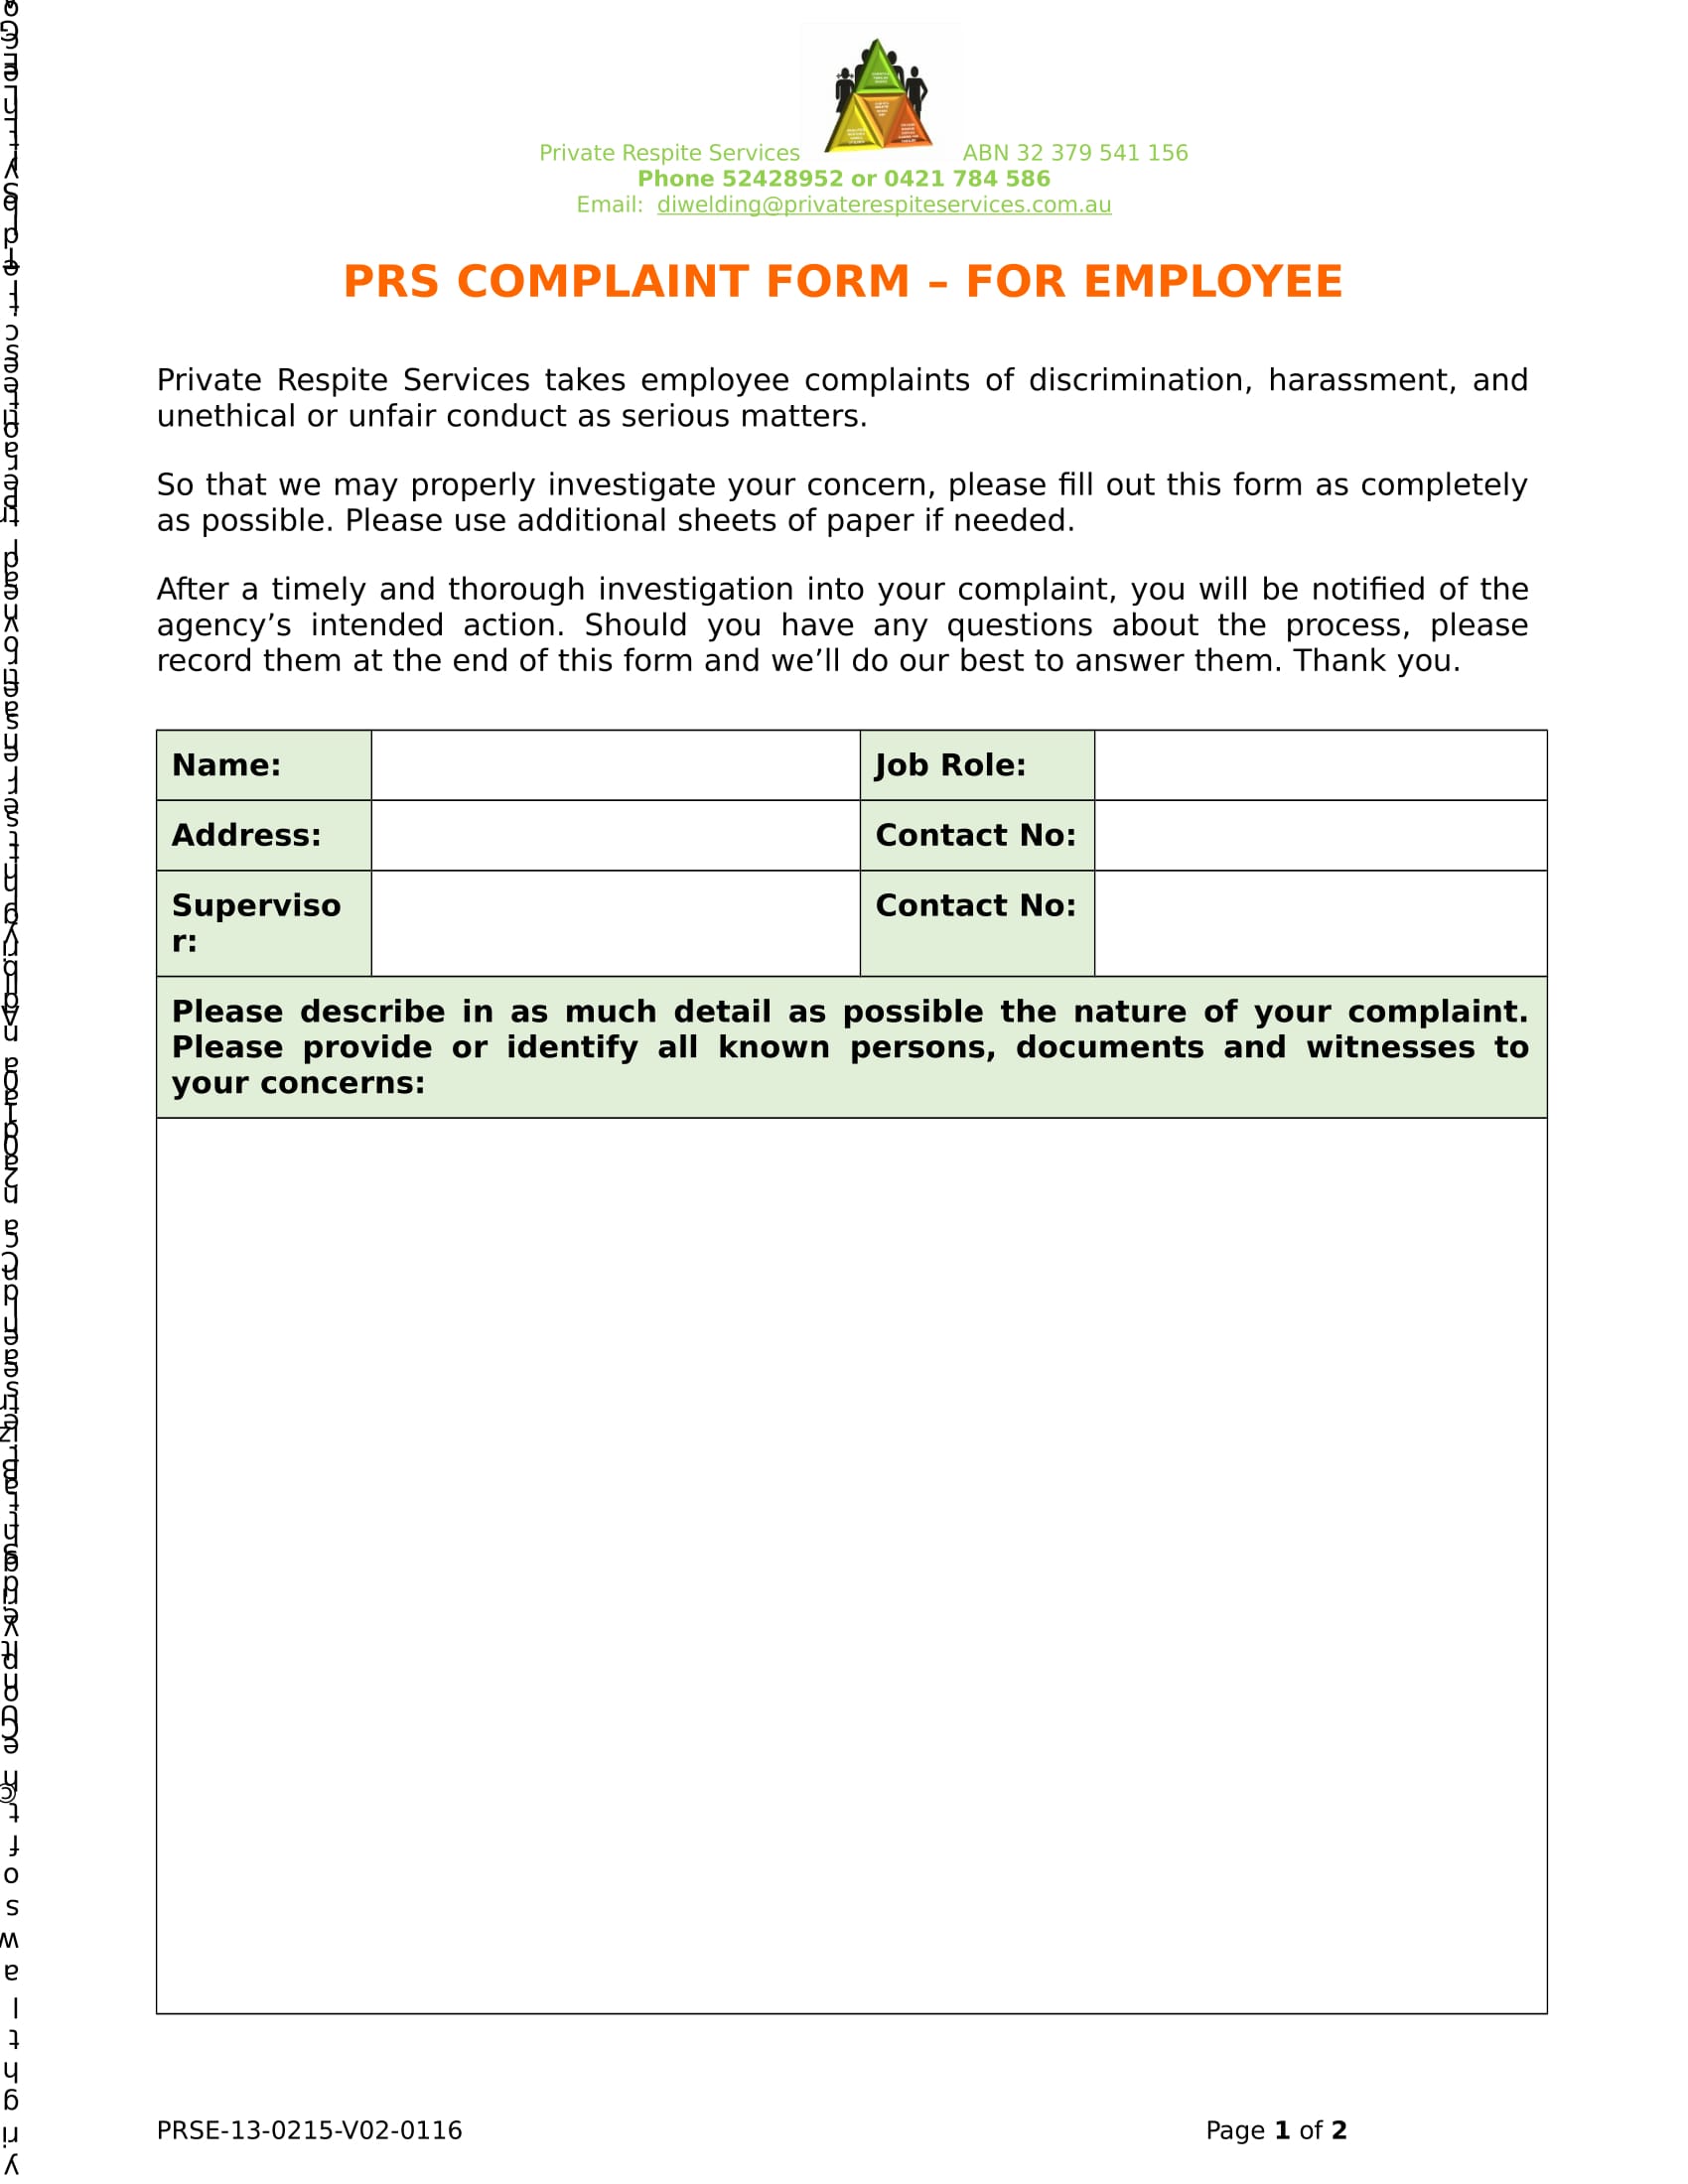 employee complaint form in doc 1